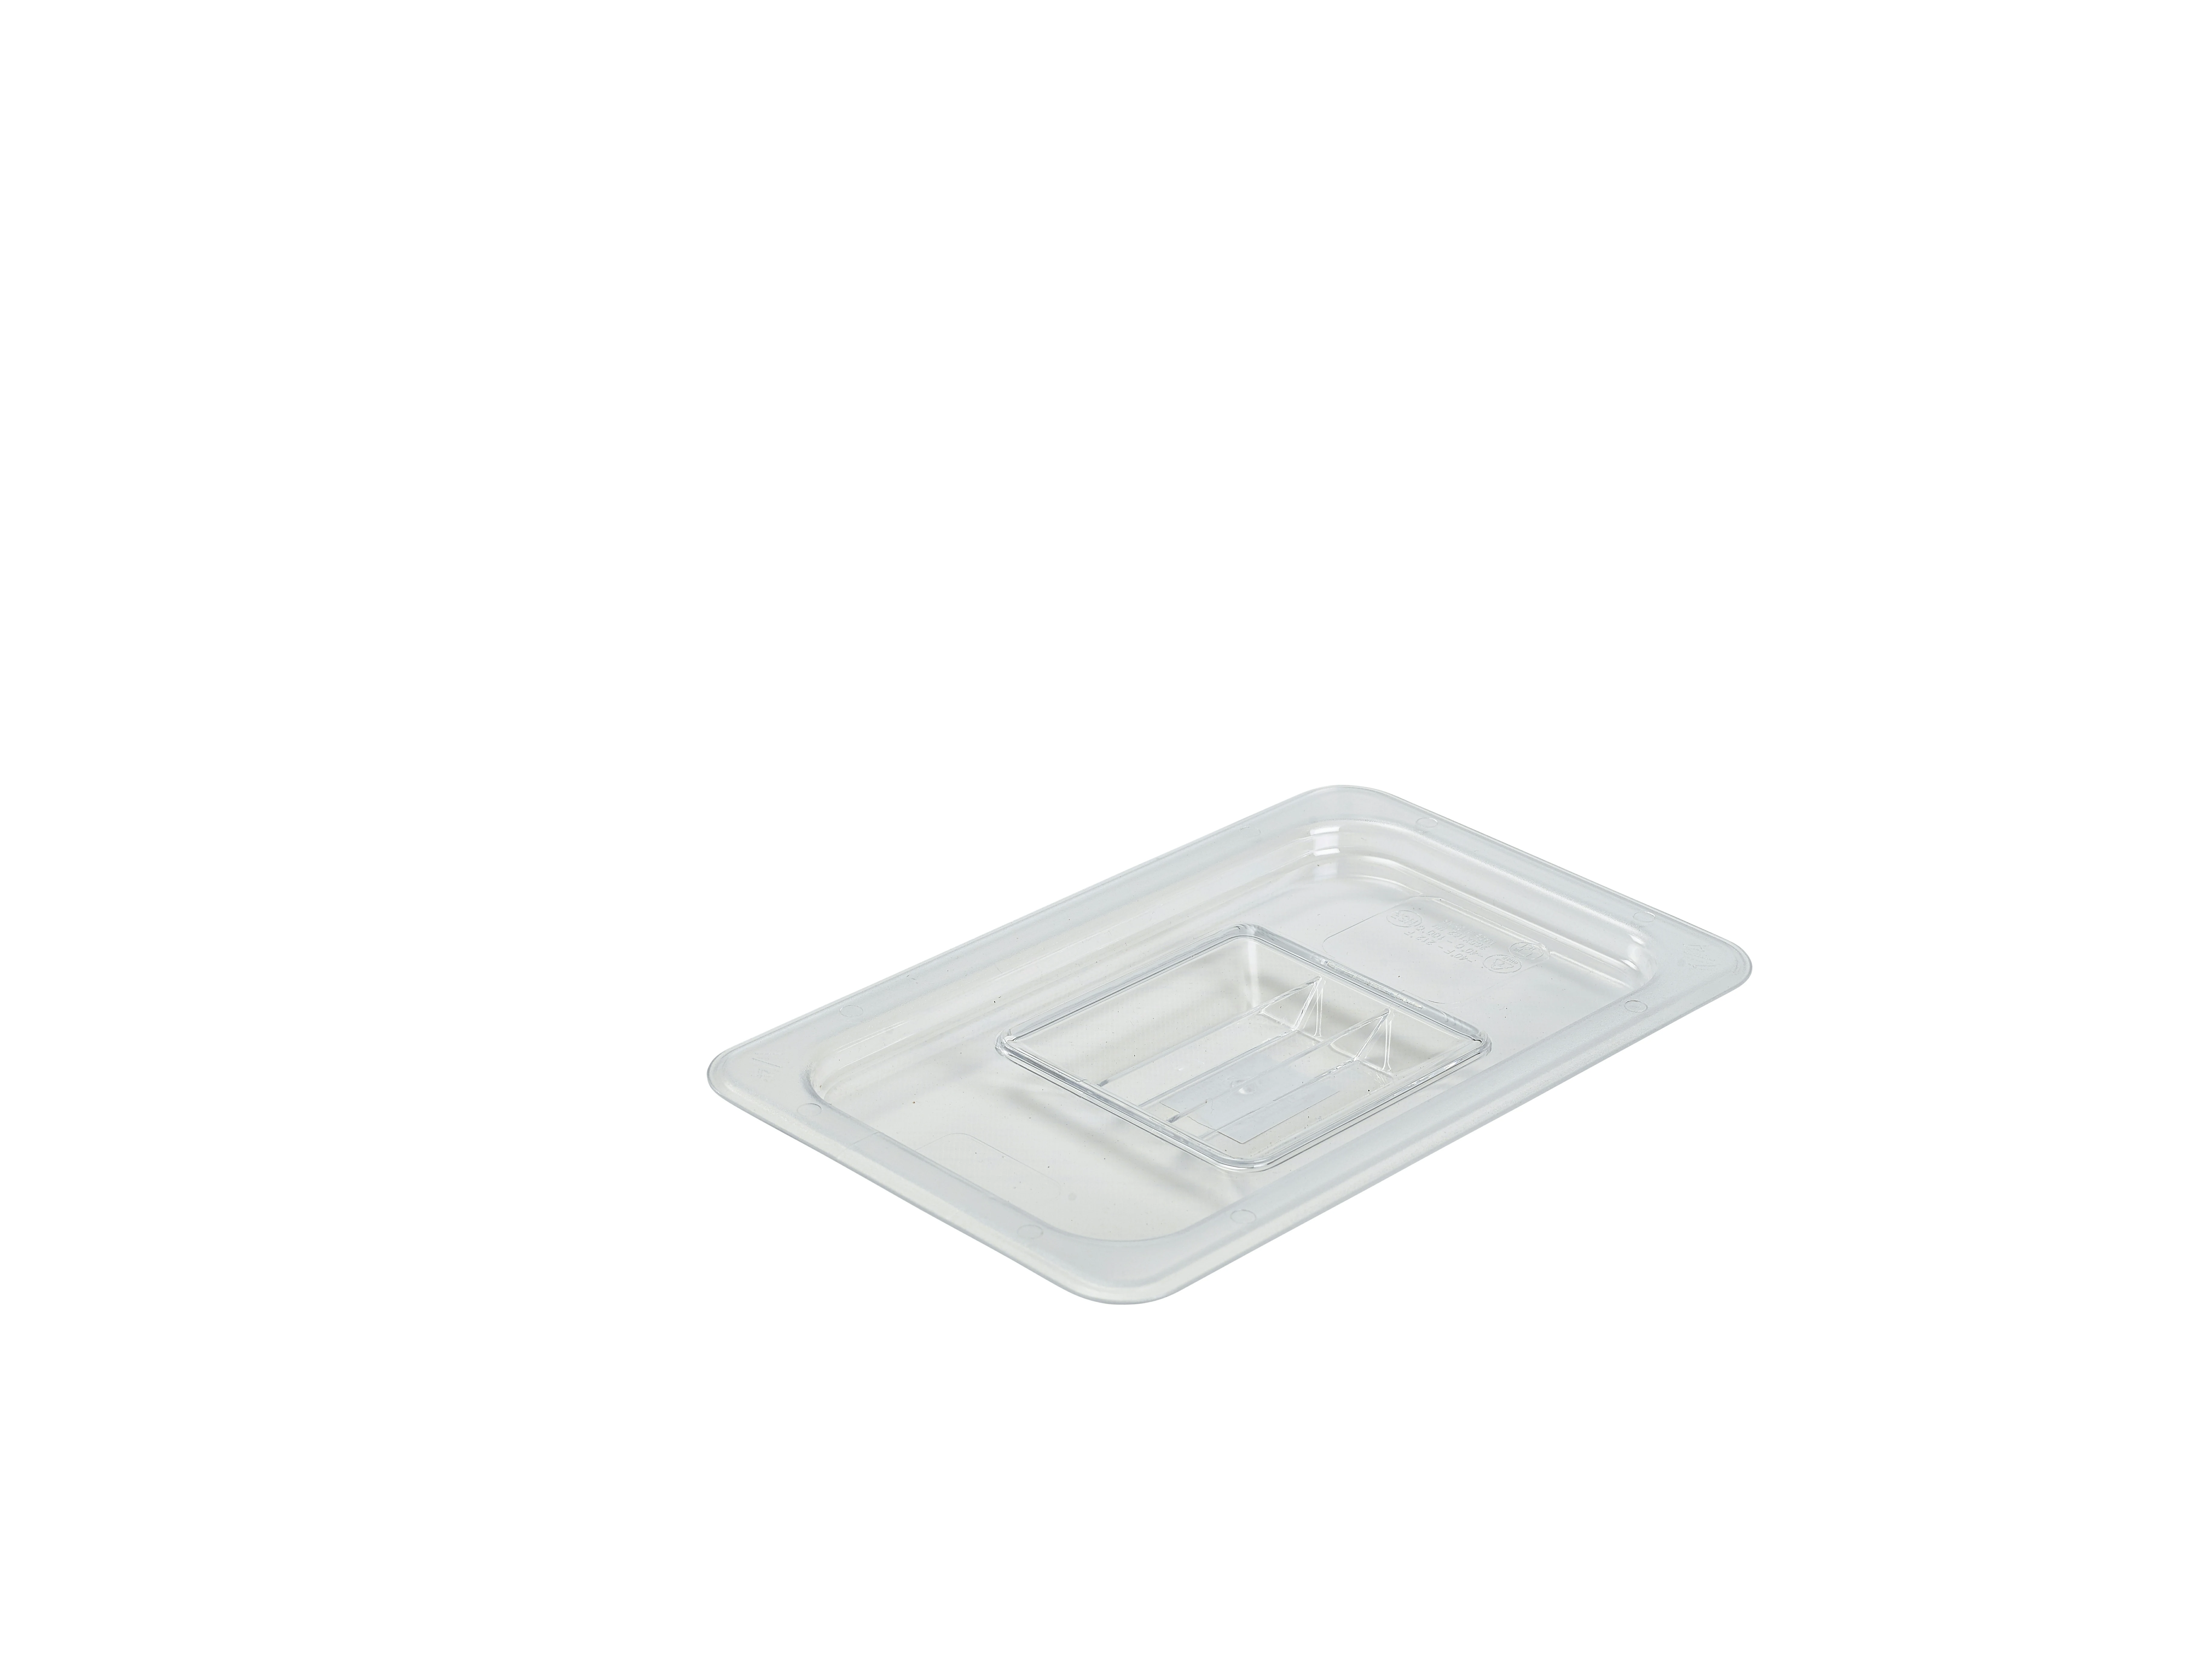 1/4 - Polycarbonate GN Lid Clear